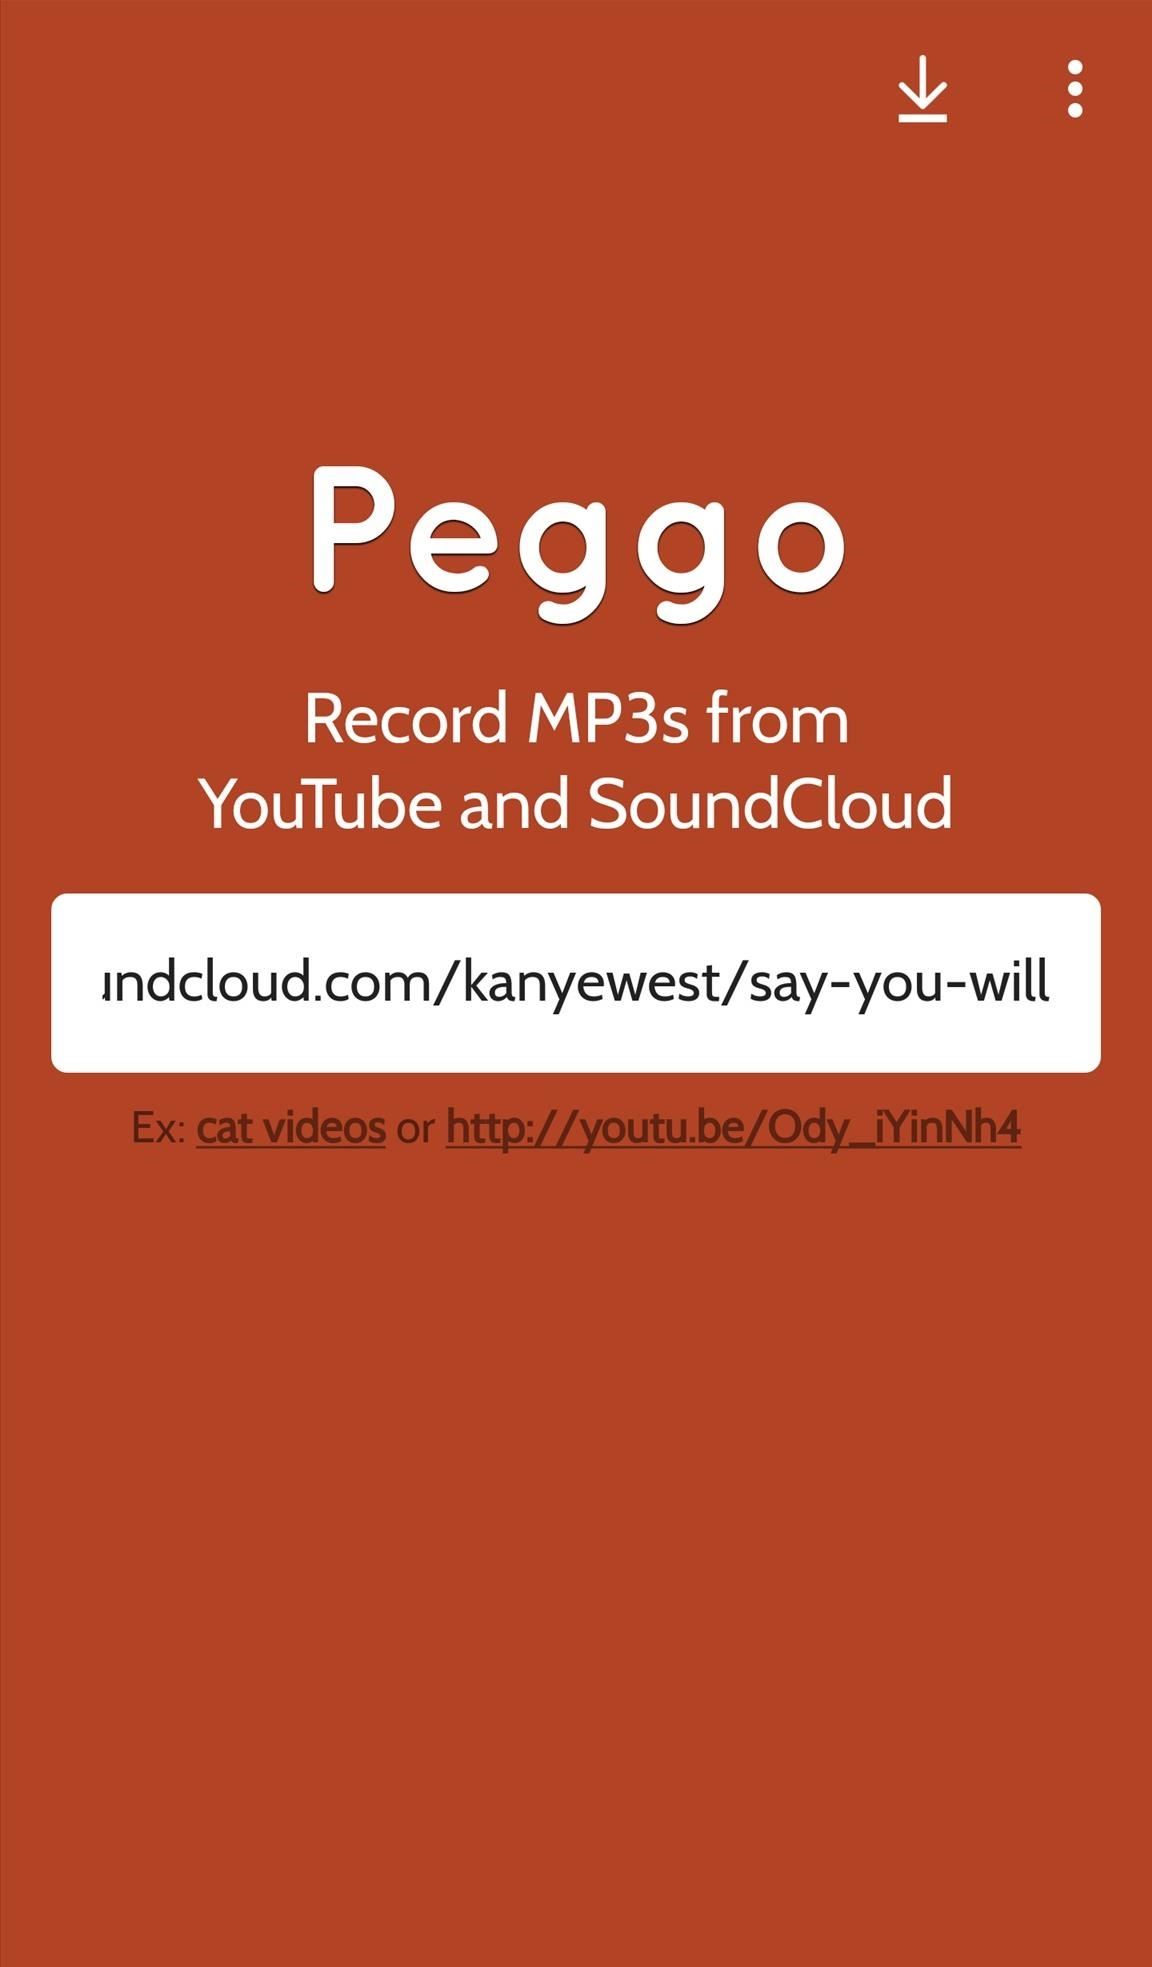 How to Download Any SoundCloud or YouTube Song on Android